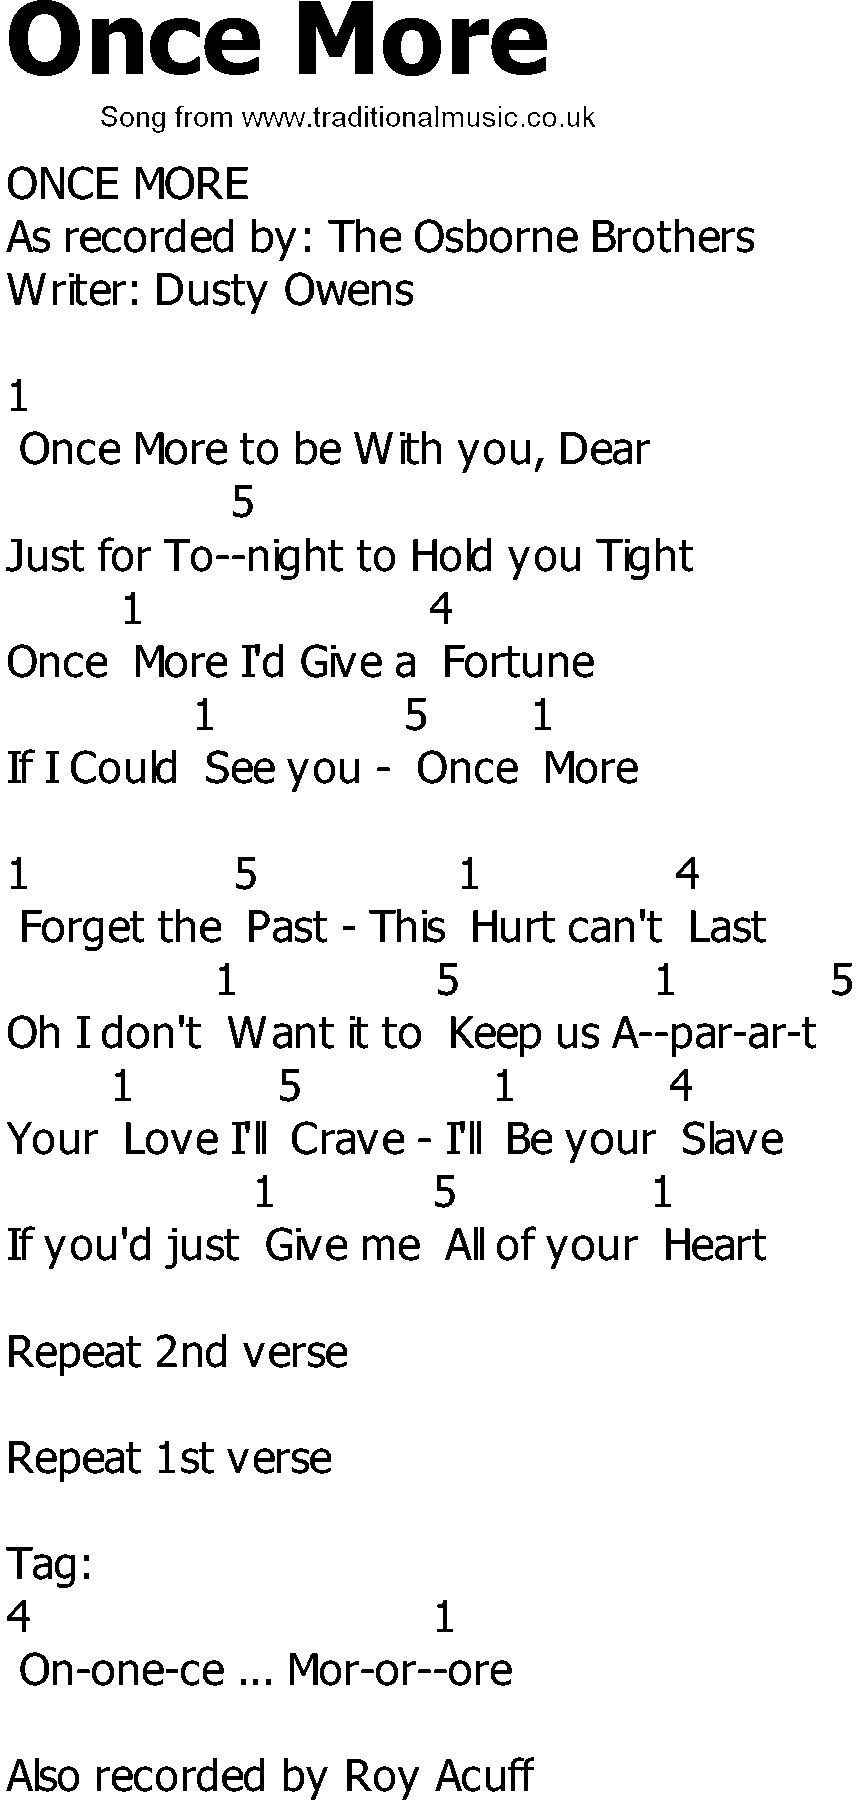 Old Country song lyrics with chords - Once More